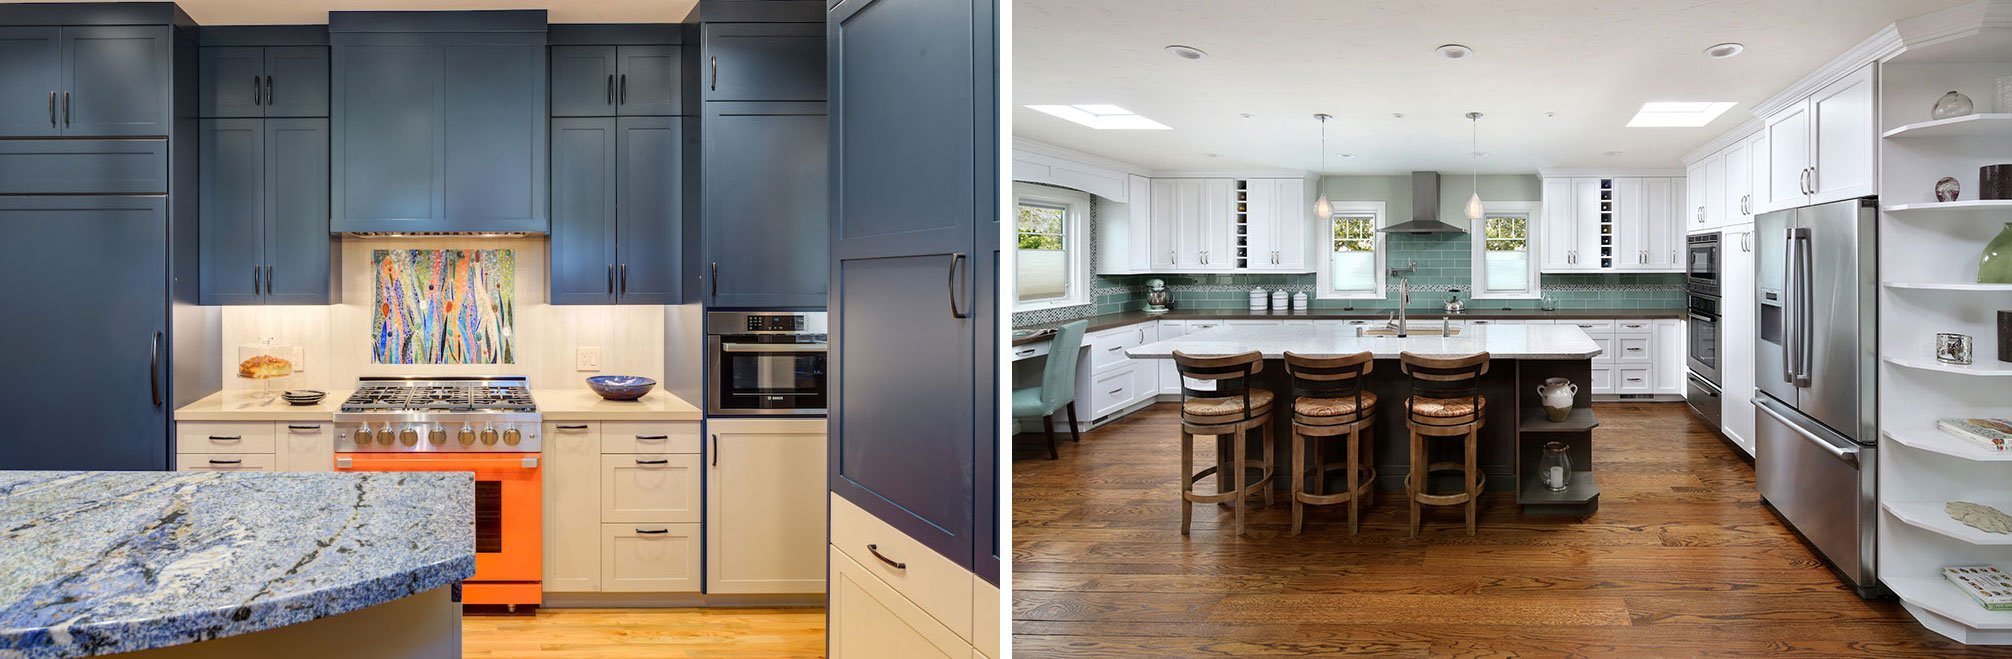 blue cabinetry with orange oven colored appliance on left, kitchen with island on right